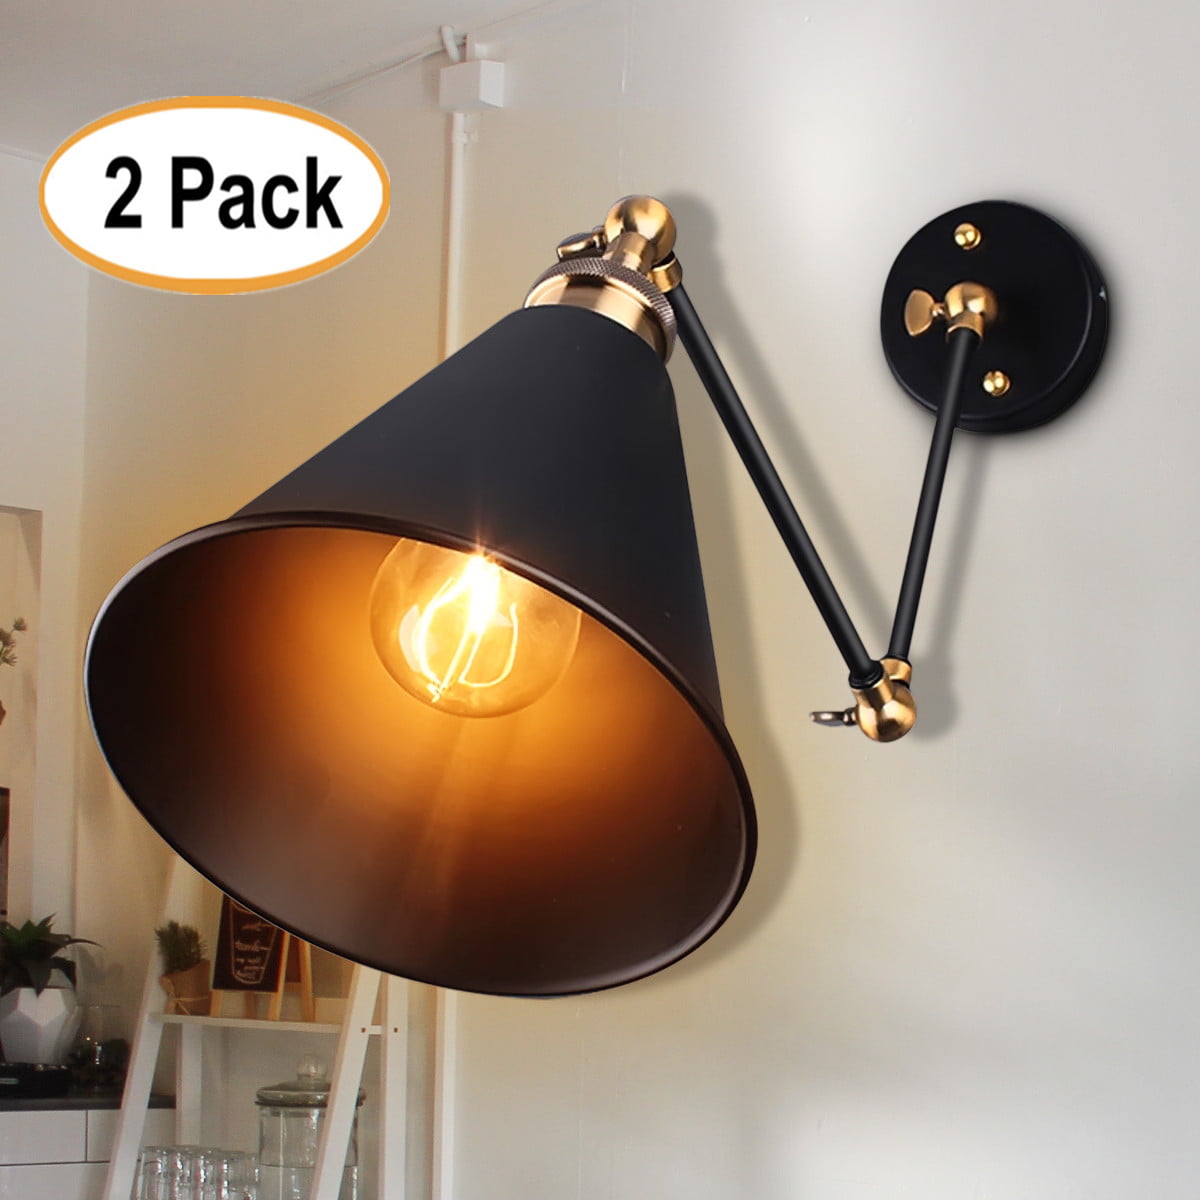 Retro Industrial Adjustable Swing Arm Lamp Wall Mount Light Sconce Fixture New 